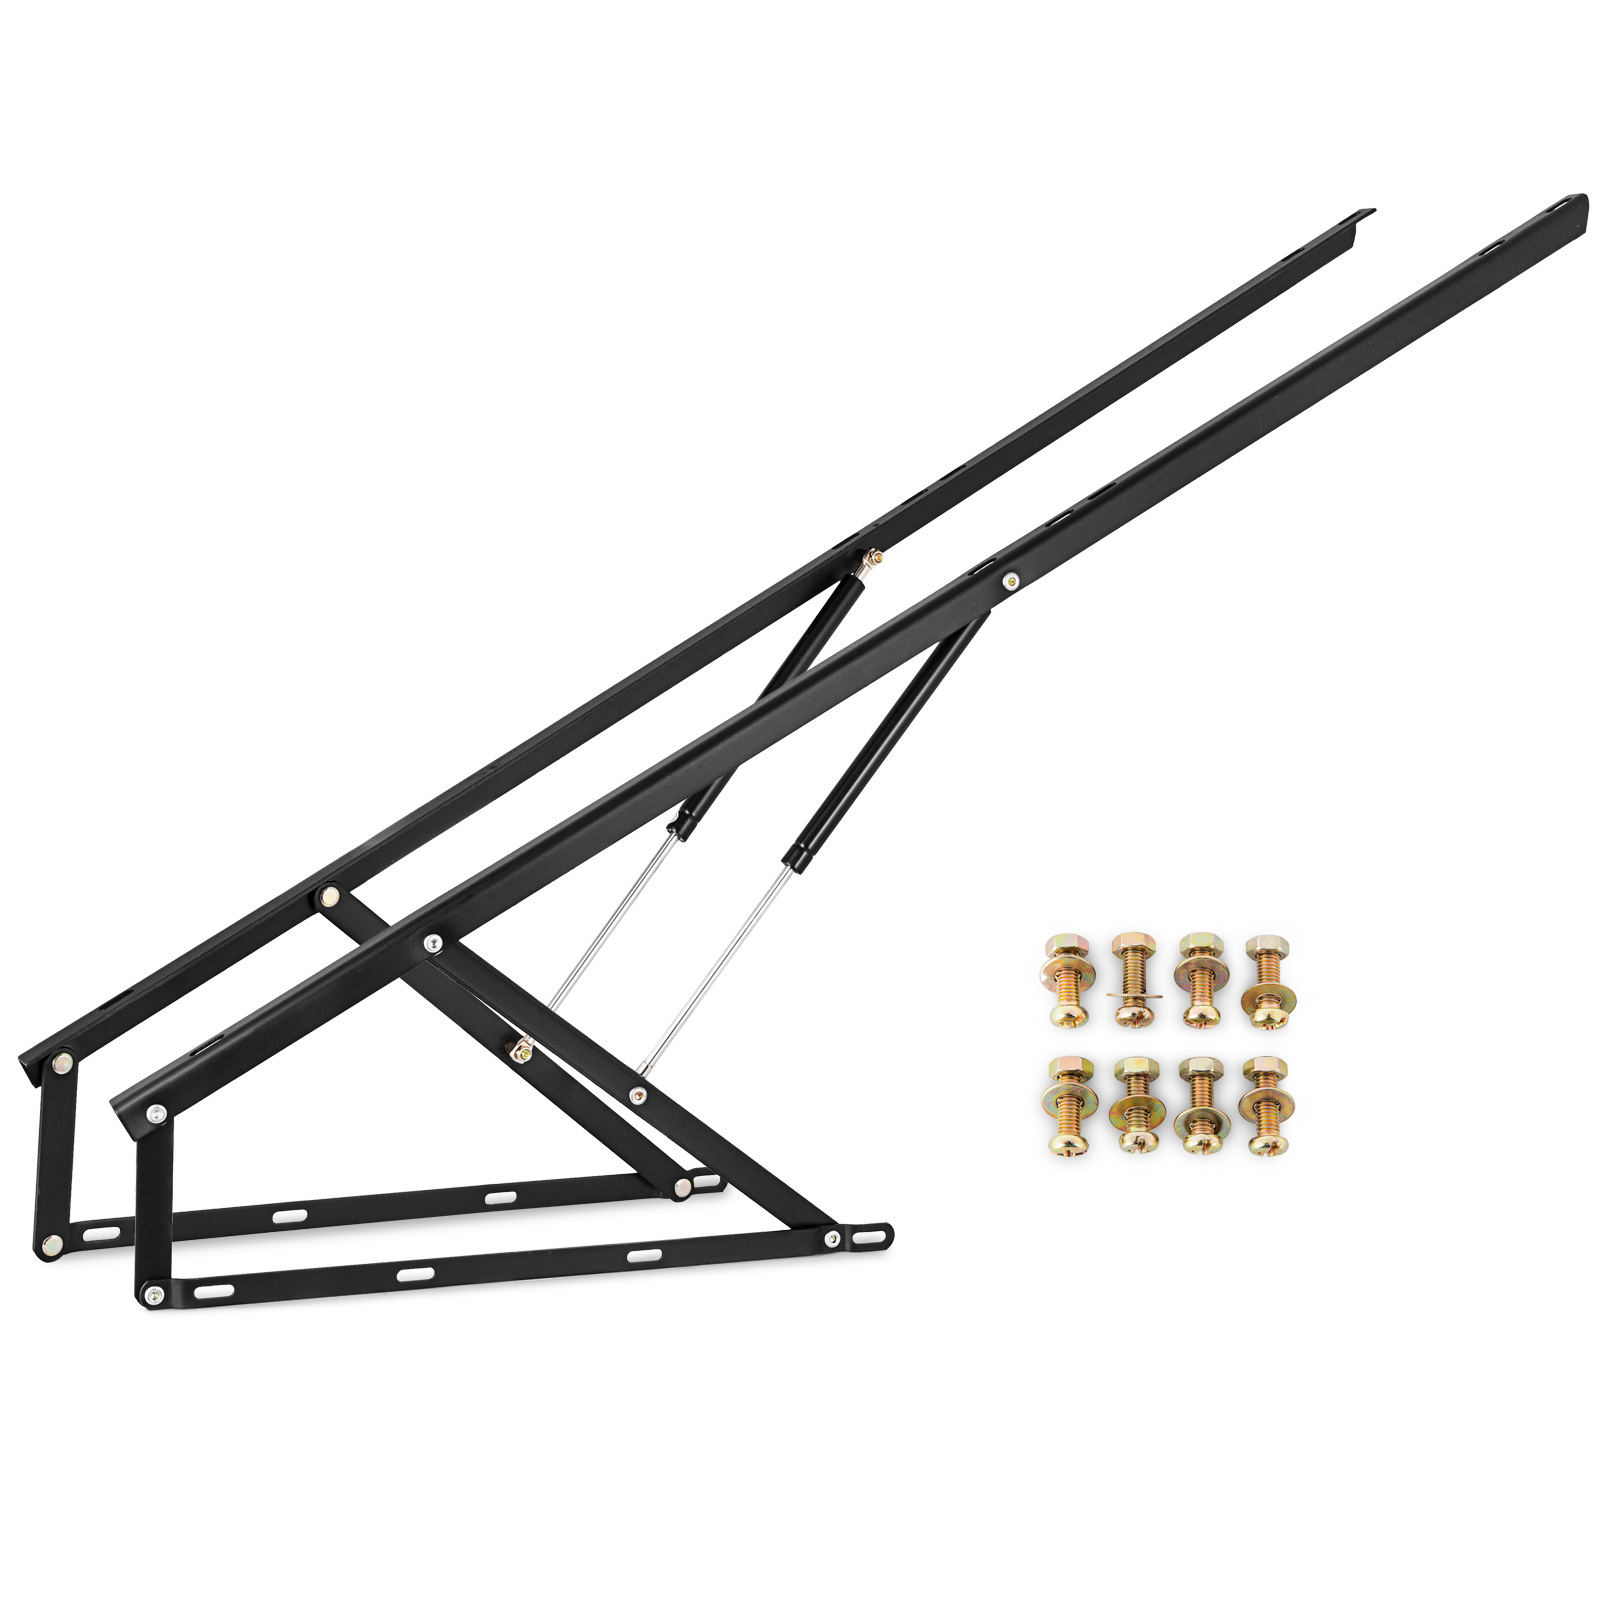 60" Bed Lift Hydraulic Mechanisms Kits For Sofa Bed Easy Install 5ft Household от Vevor Many GEOs